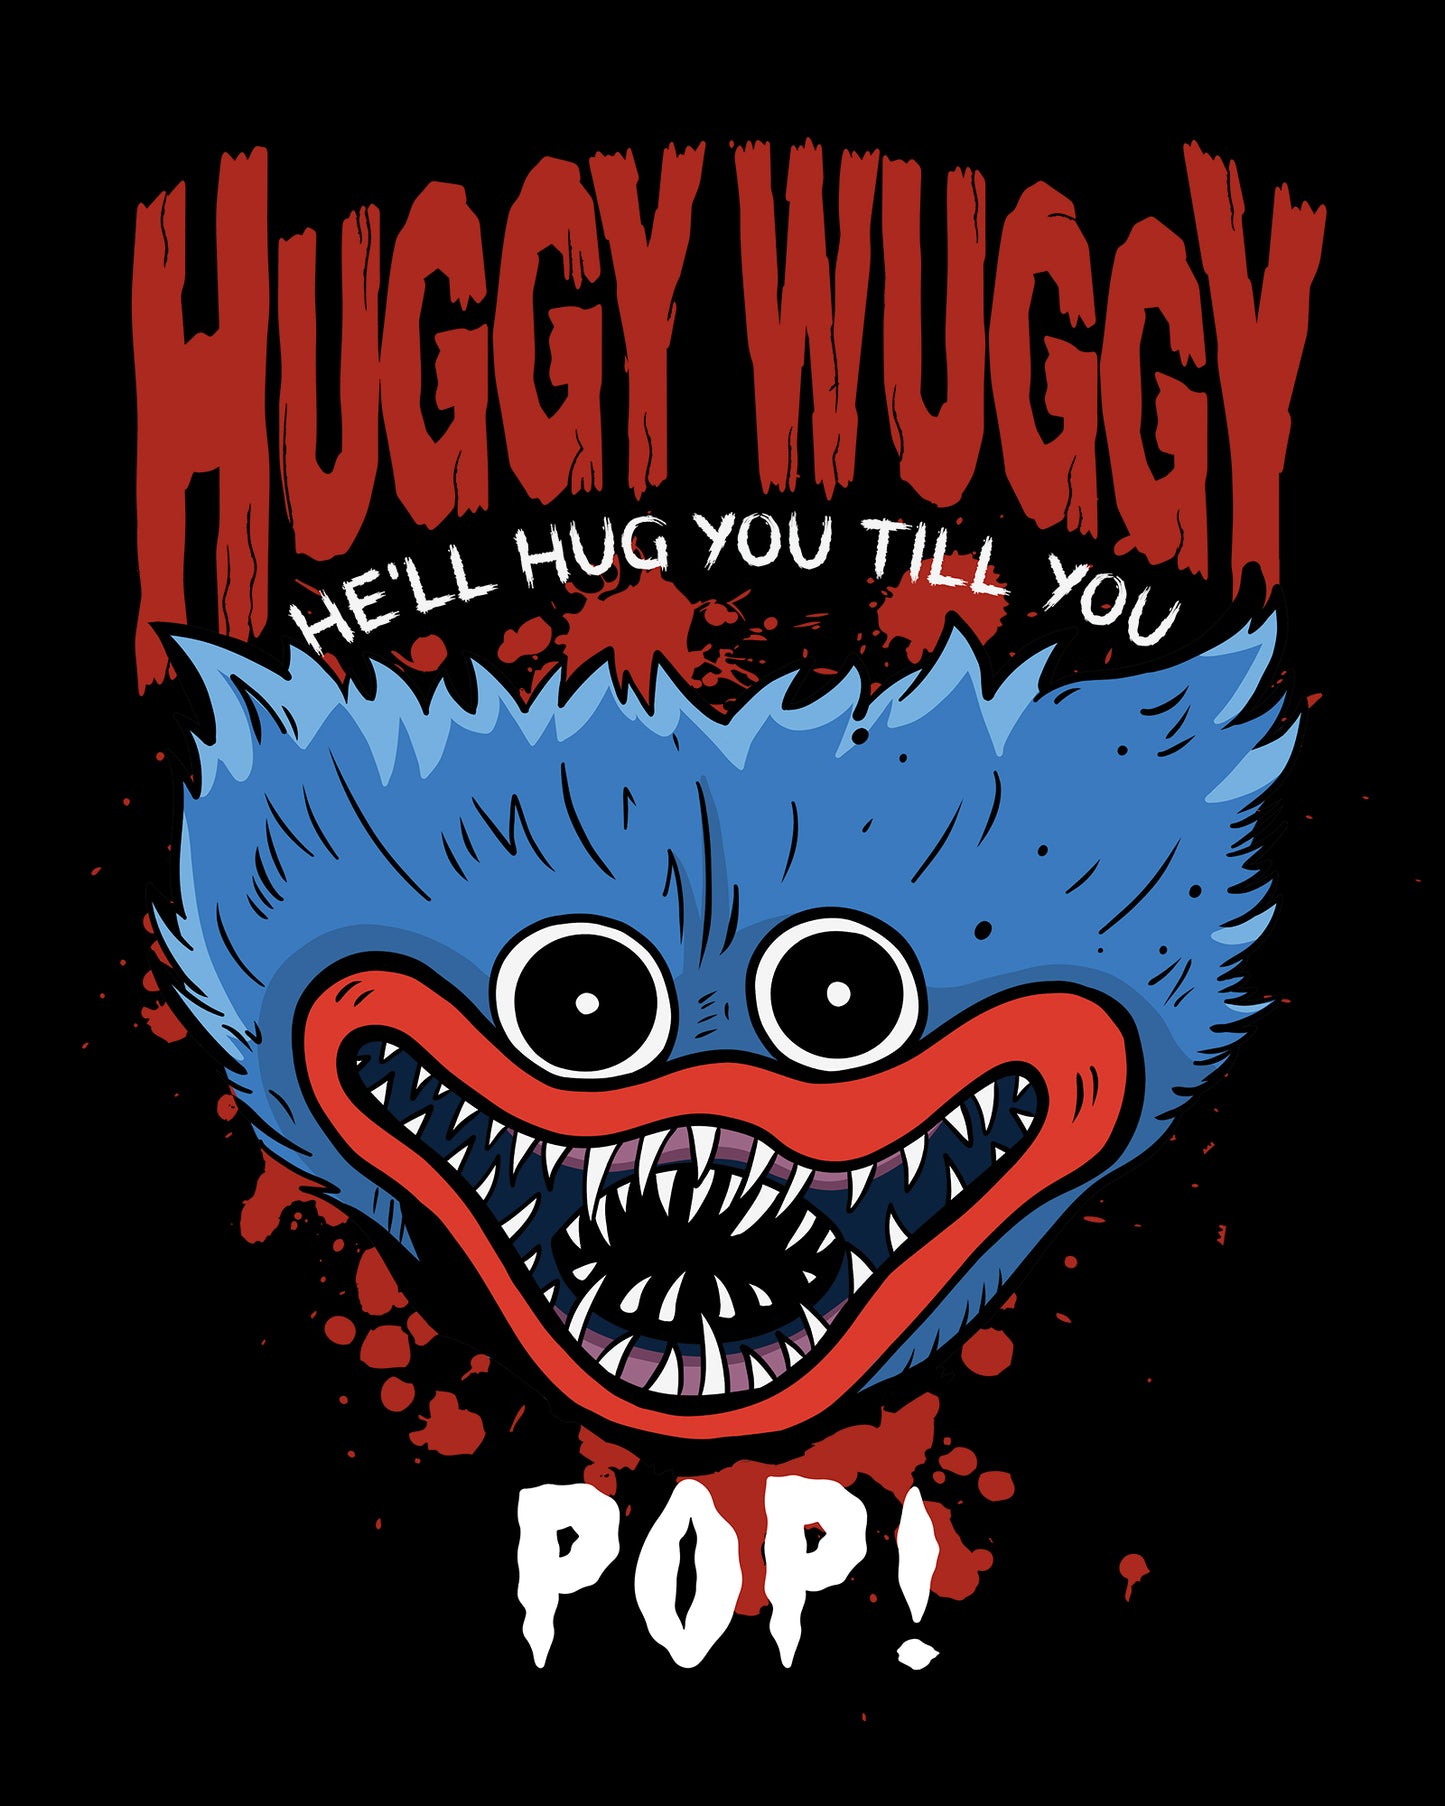 image on shirt: scary huggy wuggy with blood splats. text: Huggy Wuggy he'll hug you till you pop!